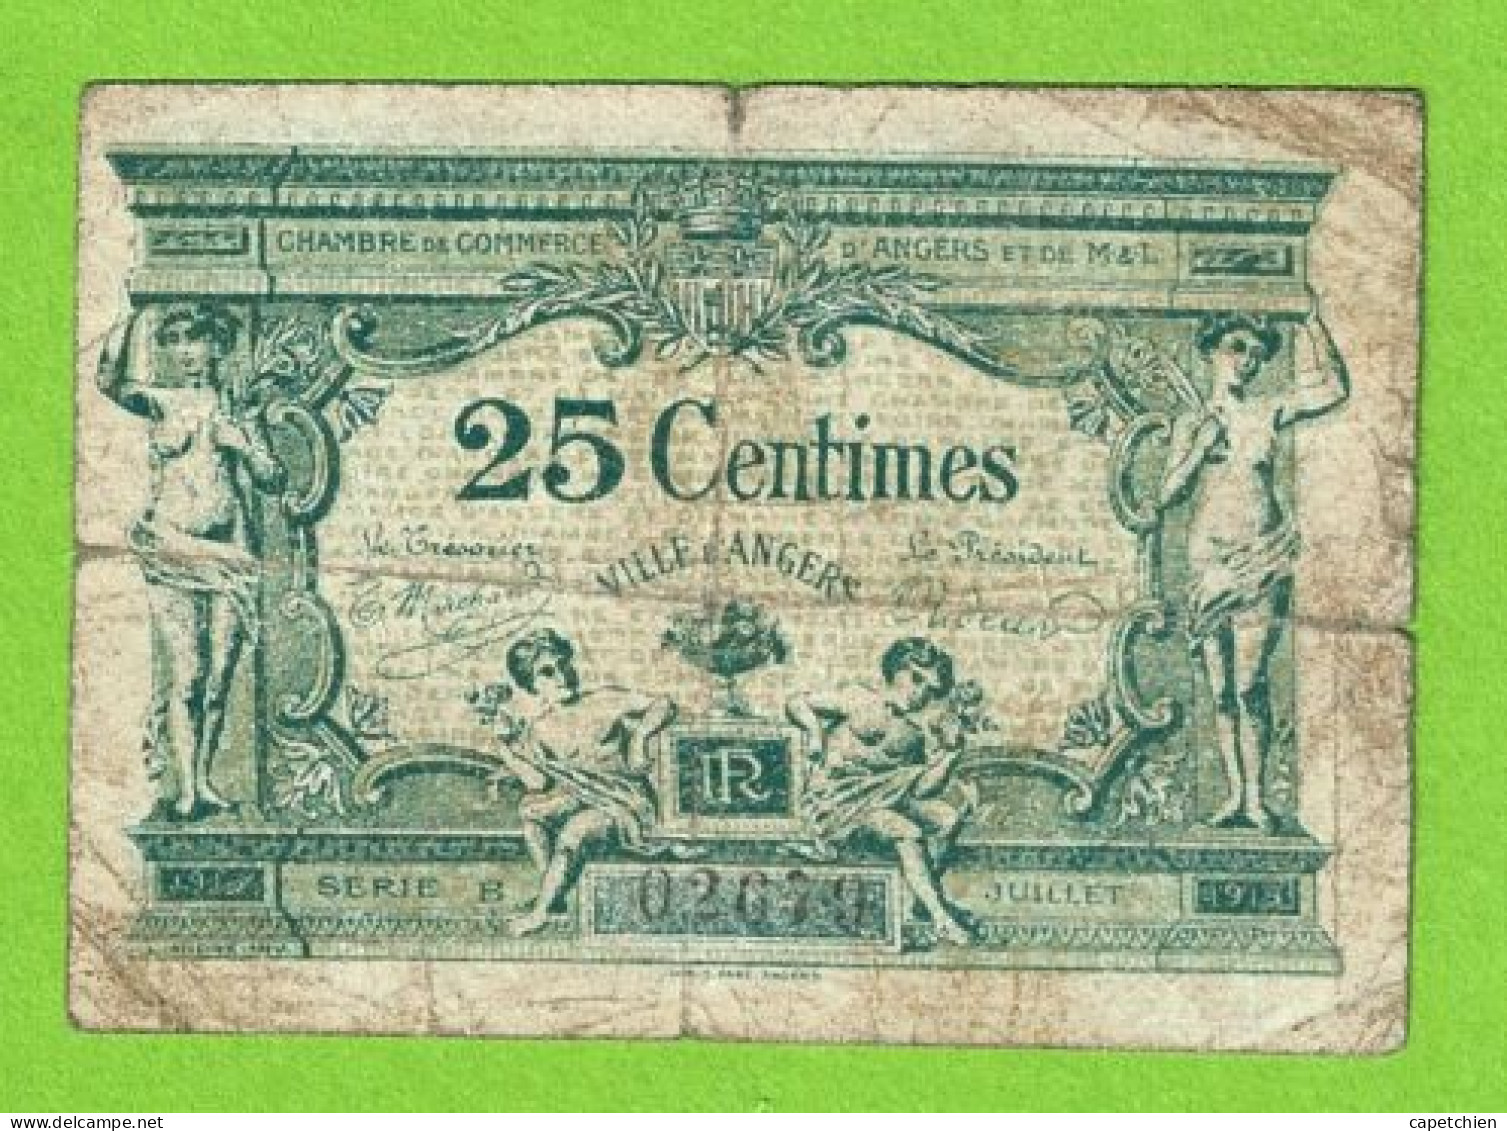 FRANCE / ANGERS / CHAMBRE DE COMMERCE / 25 CENT / NOVEMBRE 1917 - Chamber Of Commerce